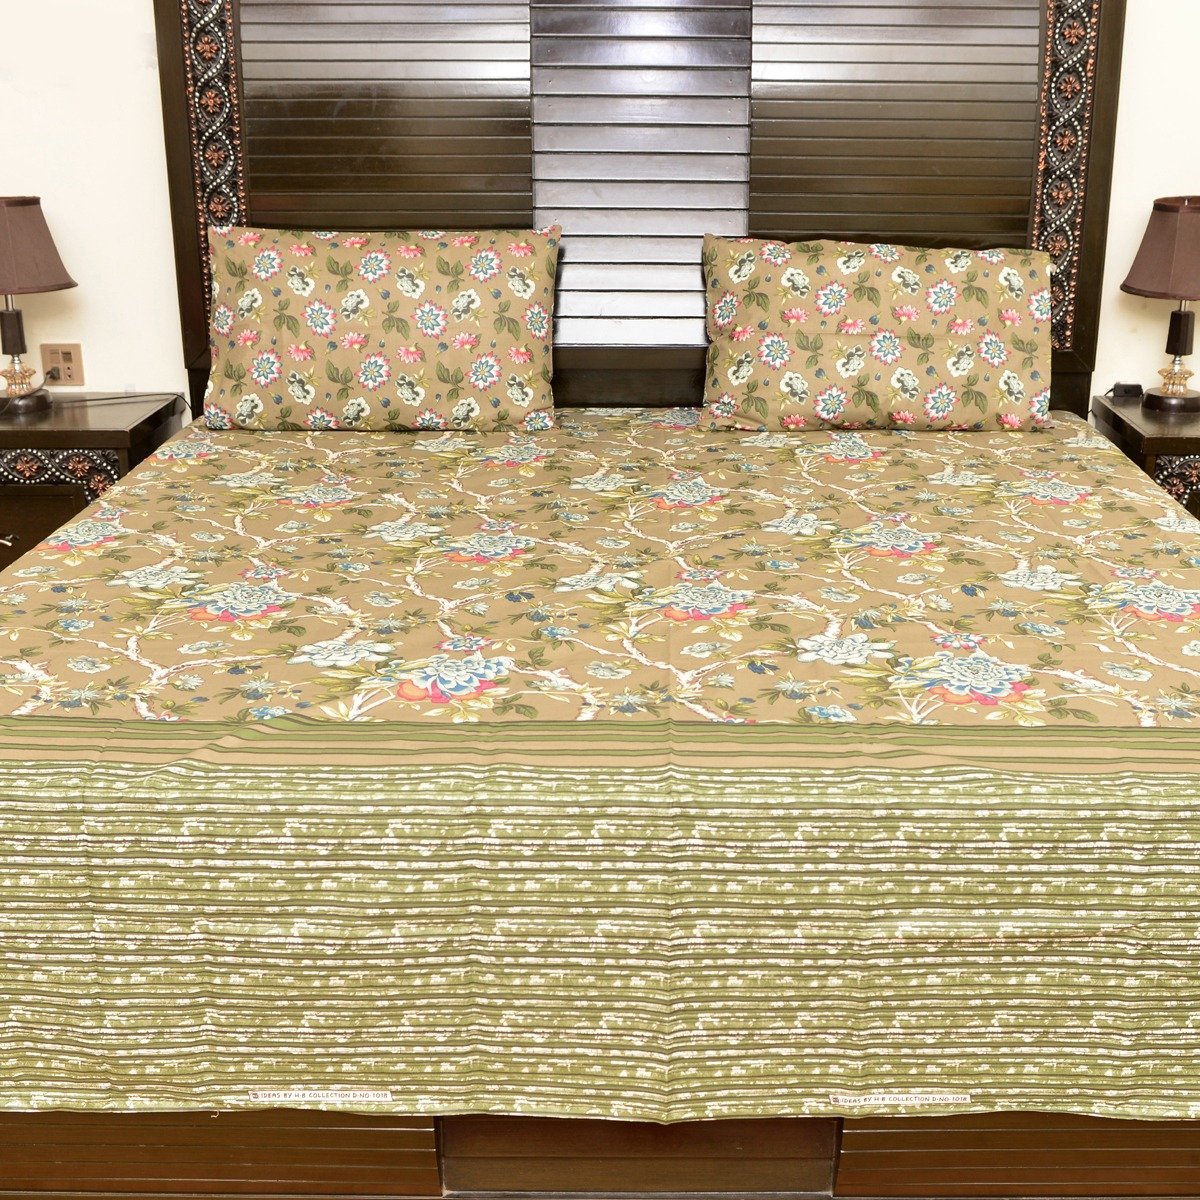 Camel coloured floral cotton bed sheet with 2 pillow cases - waseeh.com